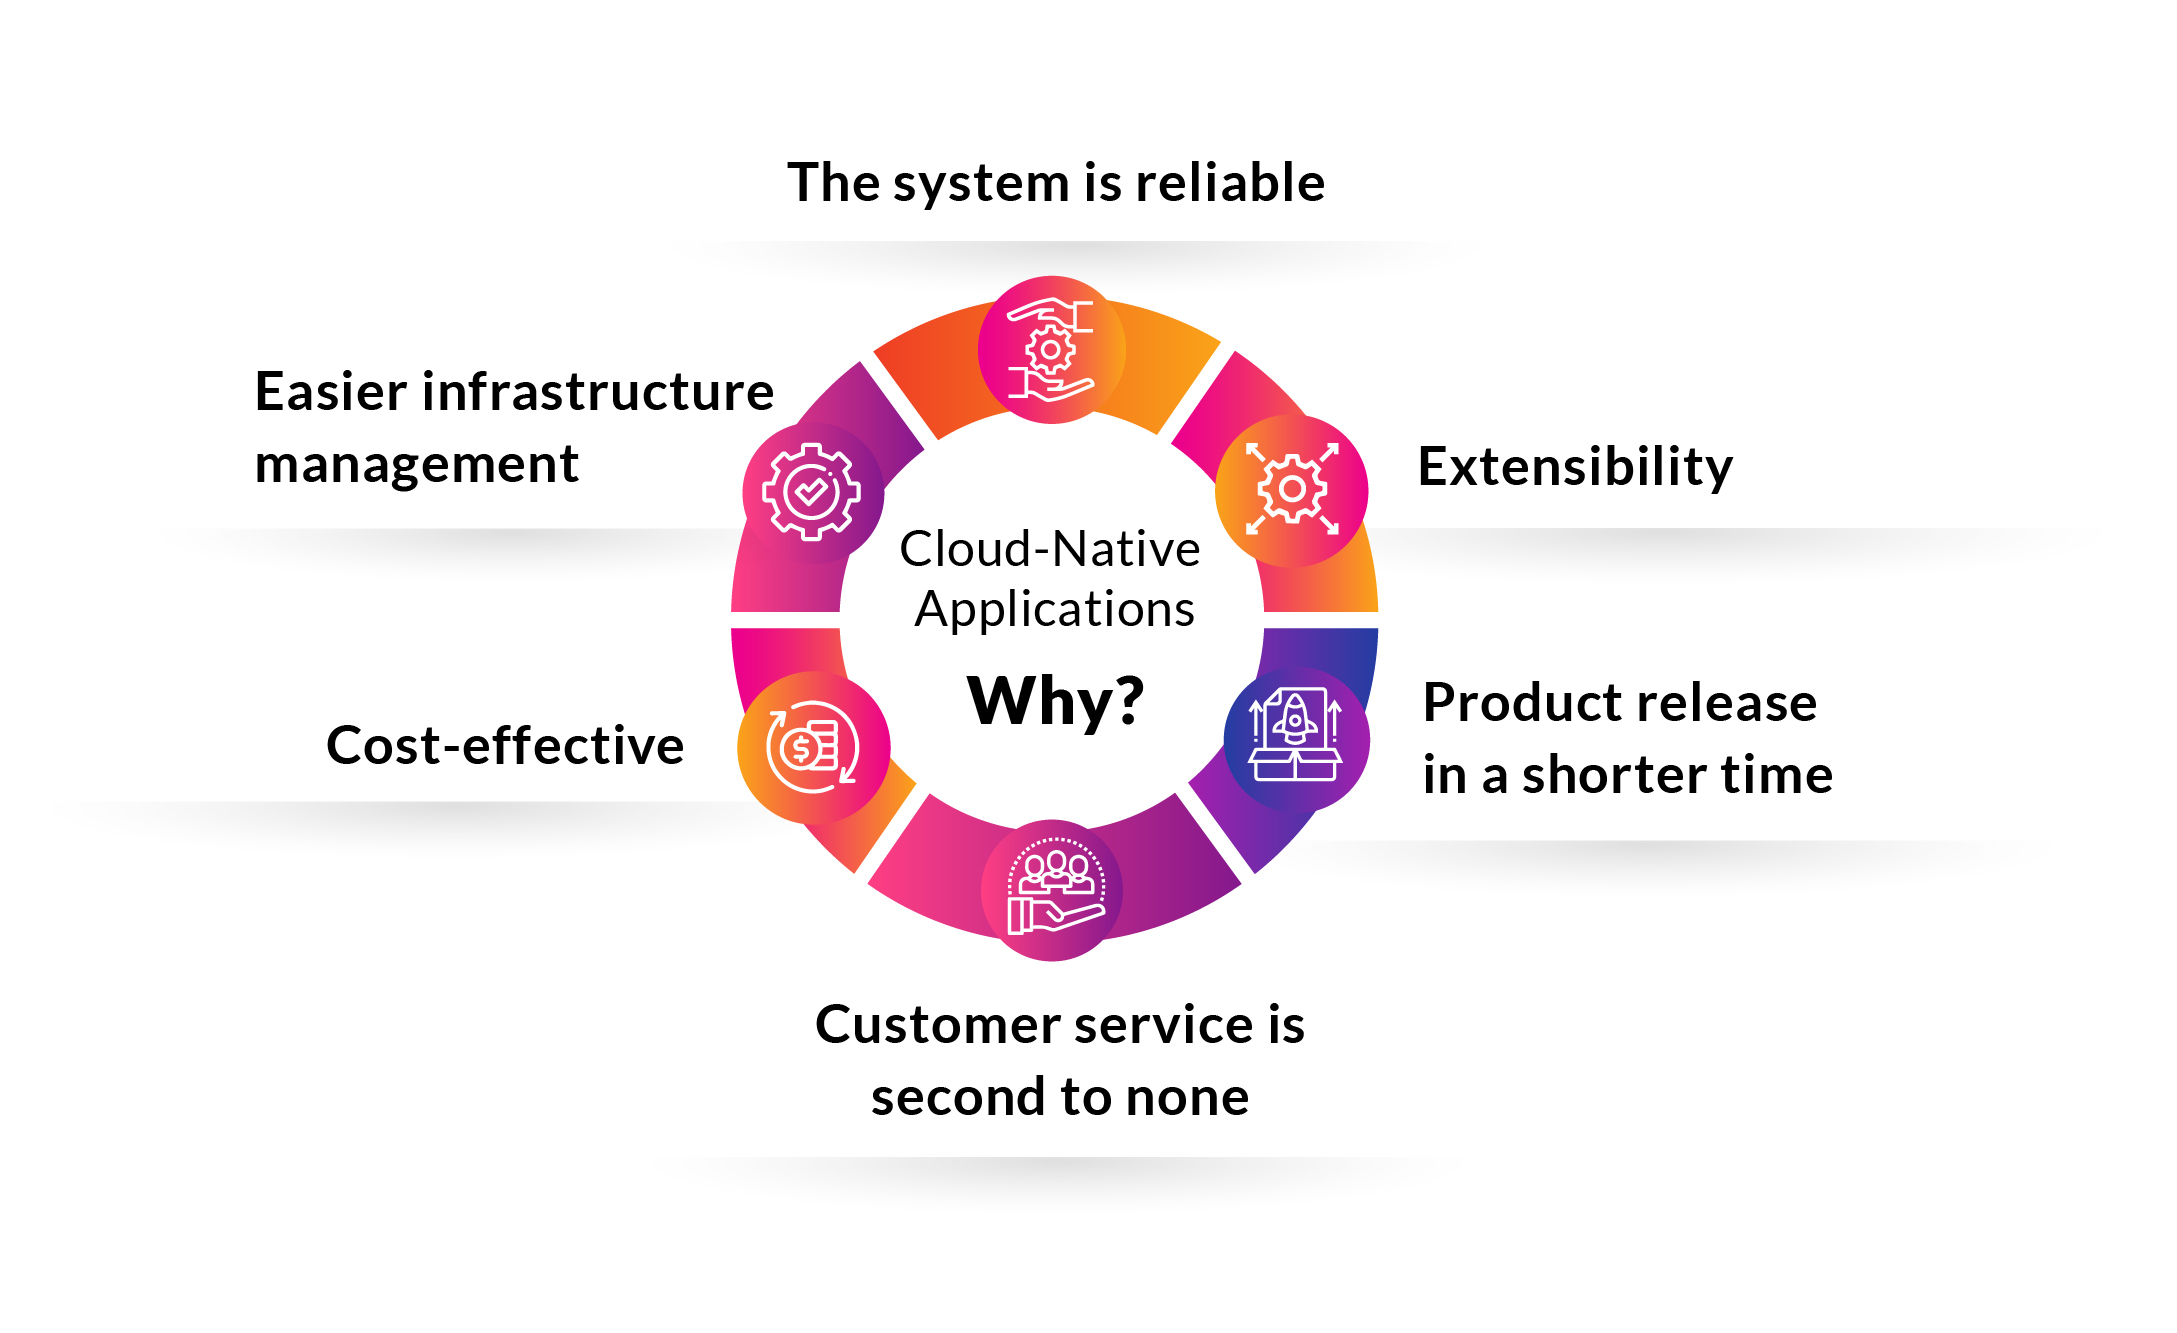 Why choose Cloud-Native Applications